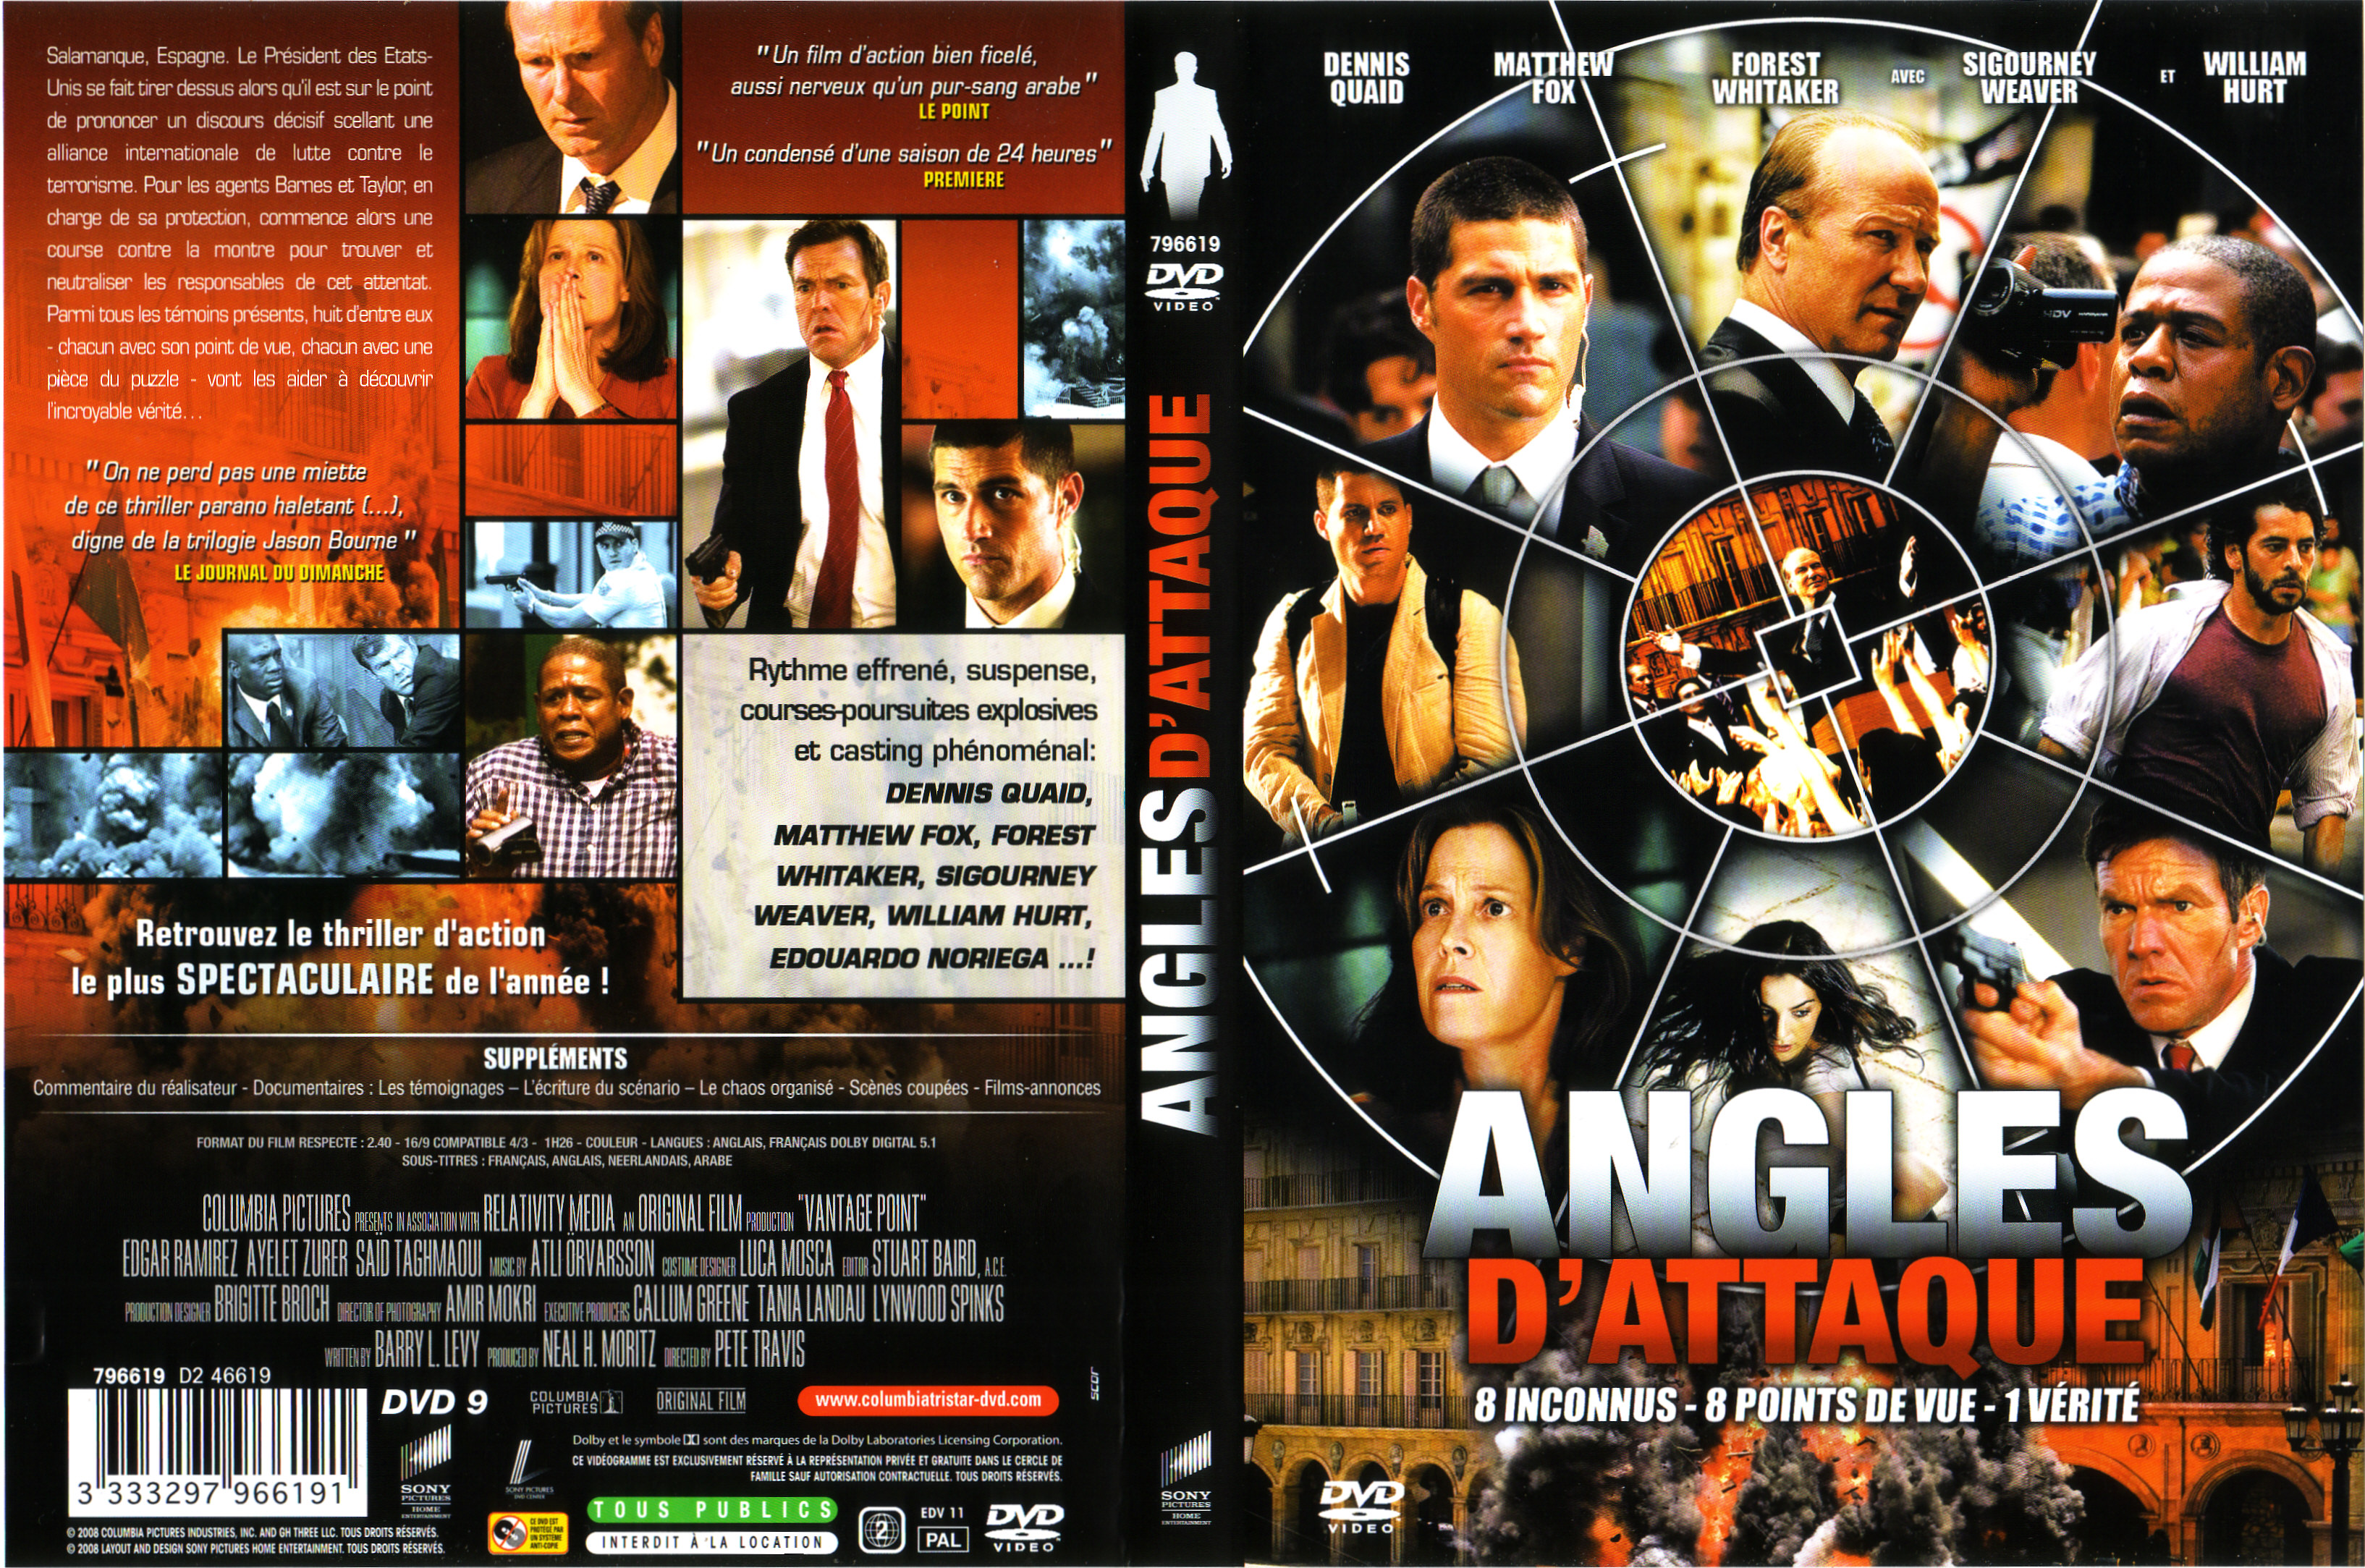 Jaquette DVD Angles d